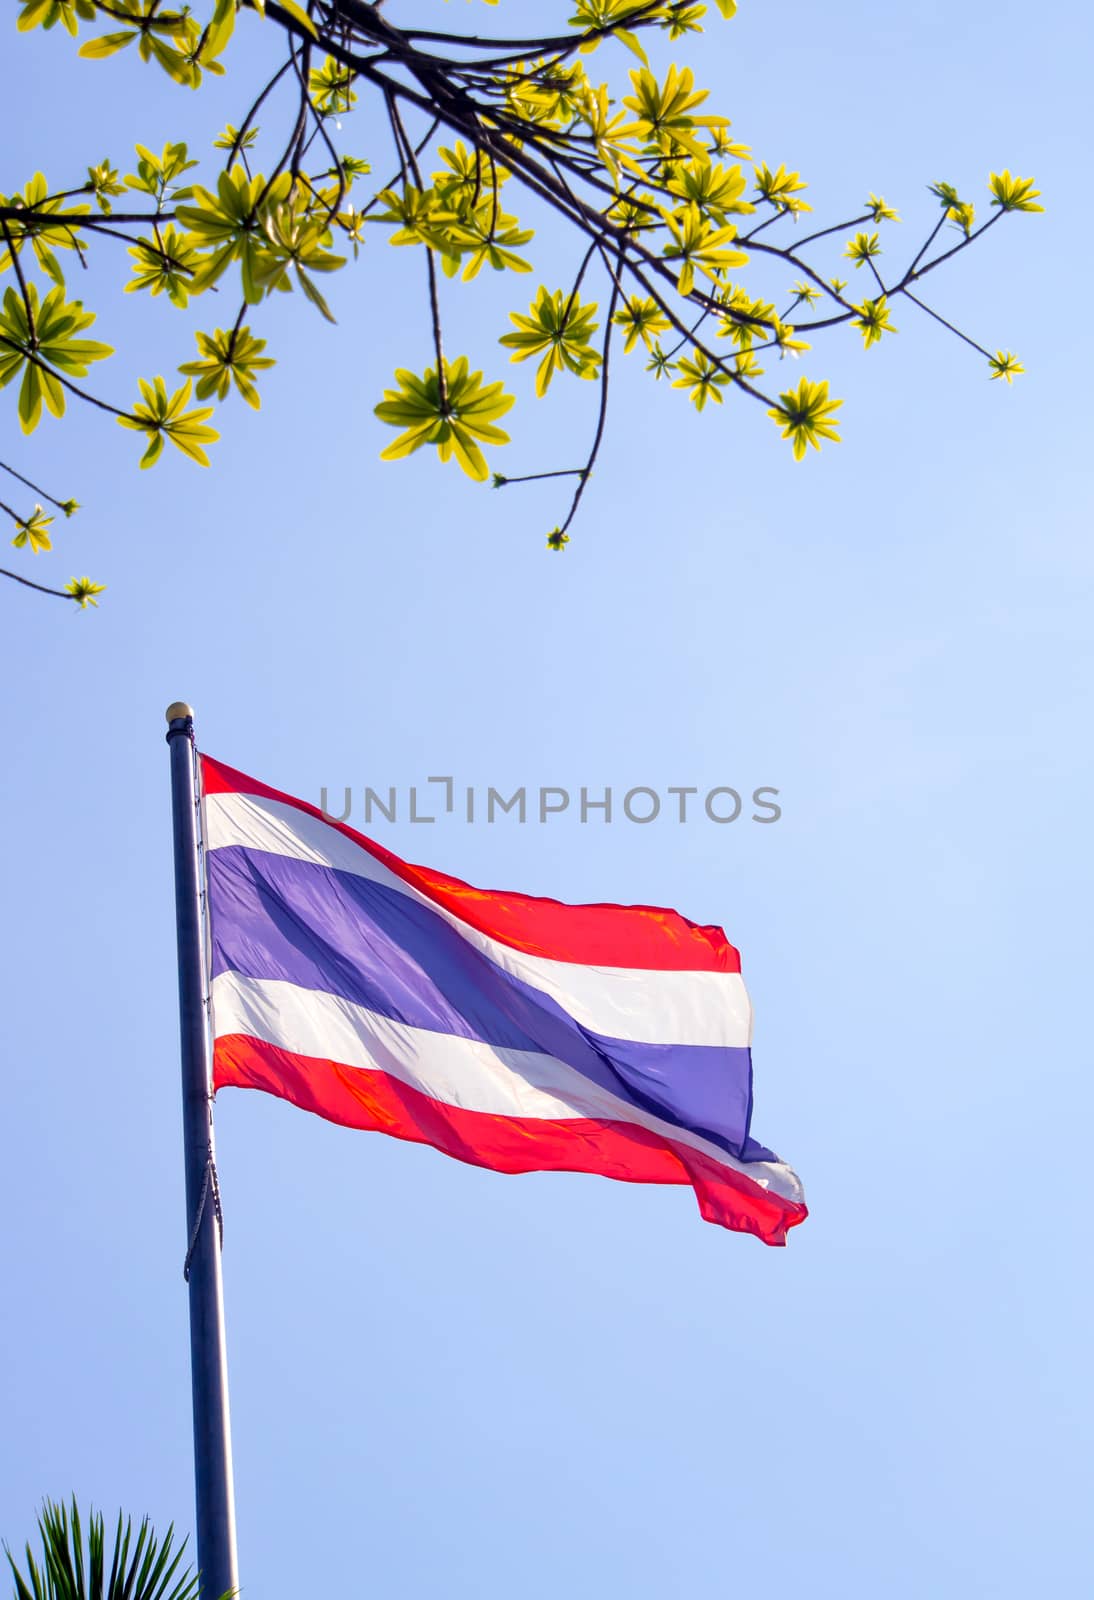 Thailand flag atop the flagpole and fresh leaves foreground and blue sky background